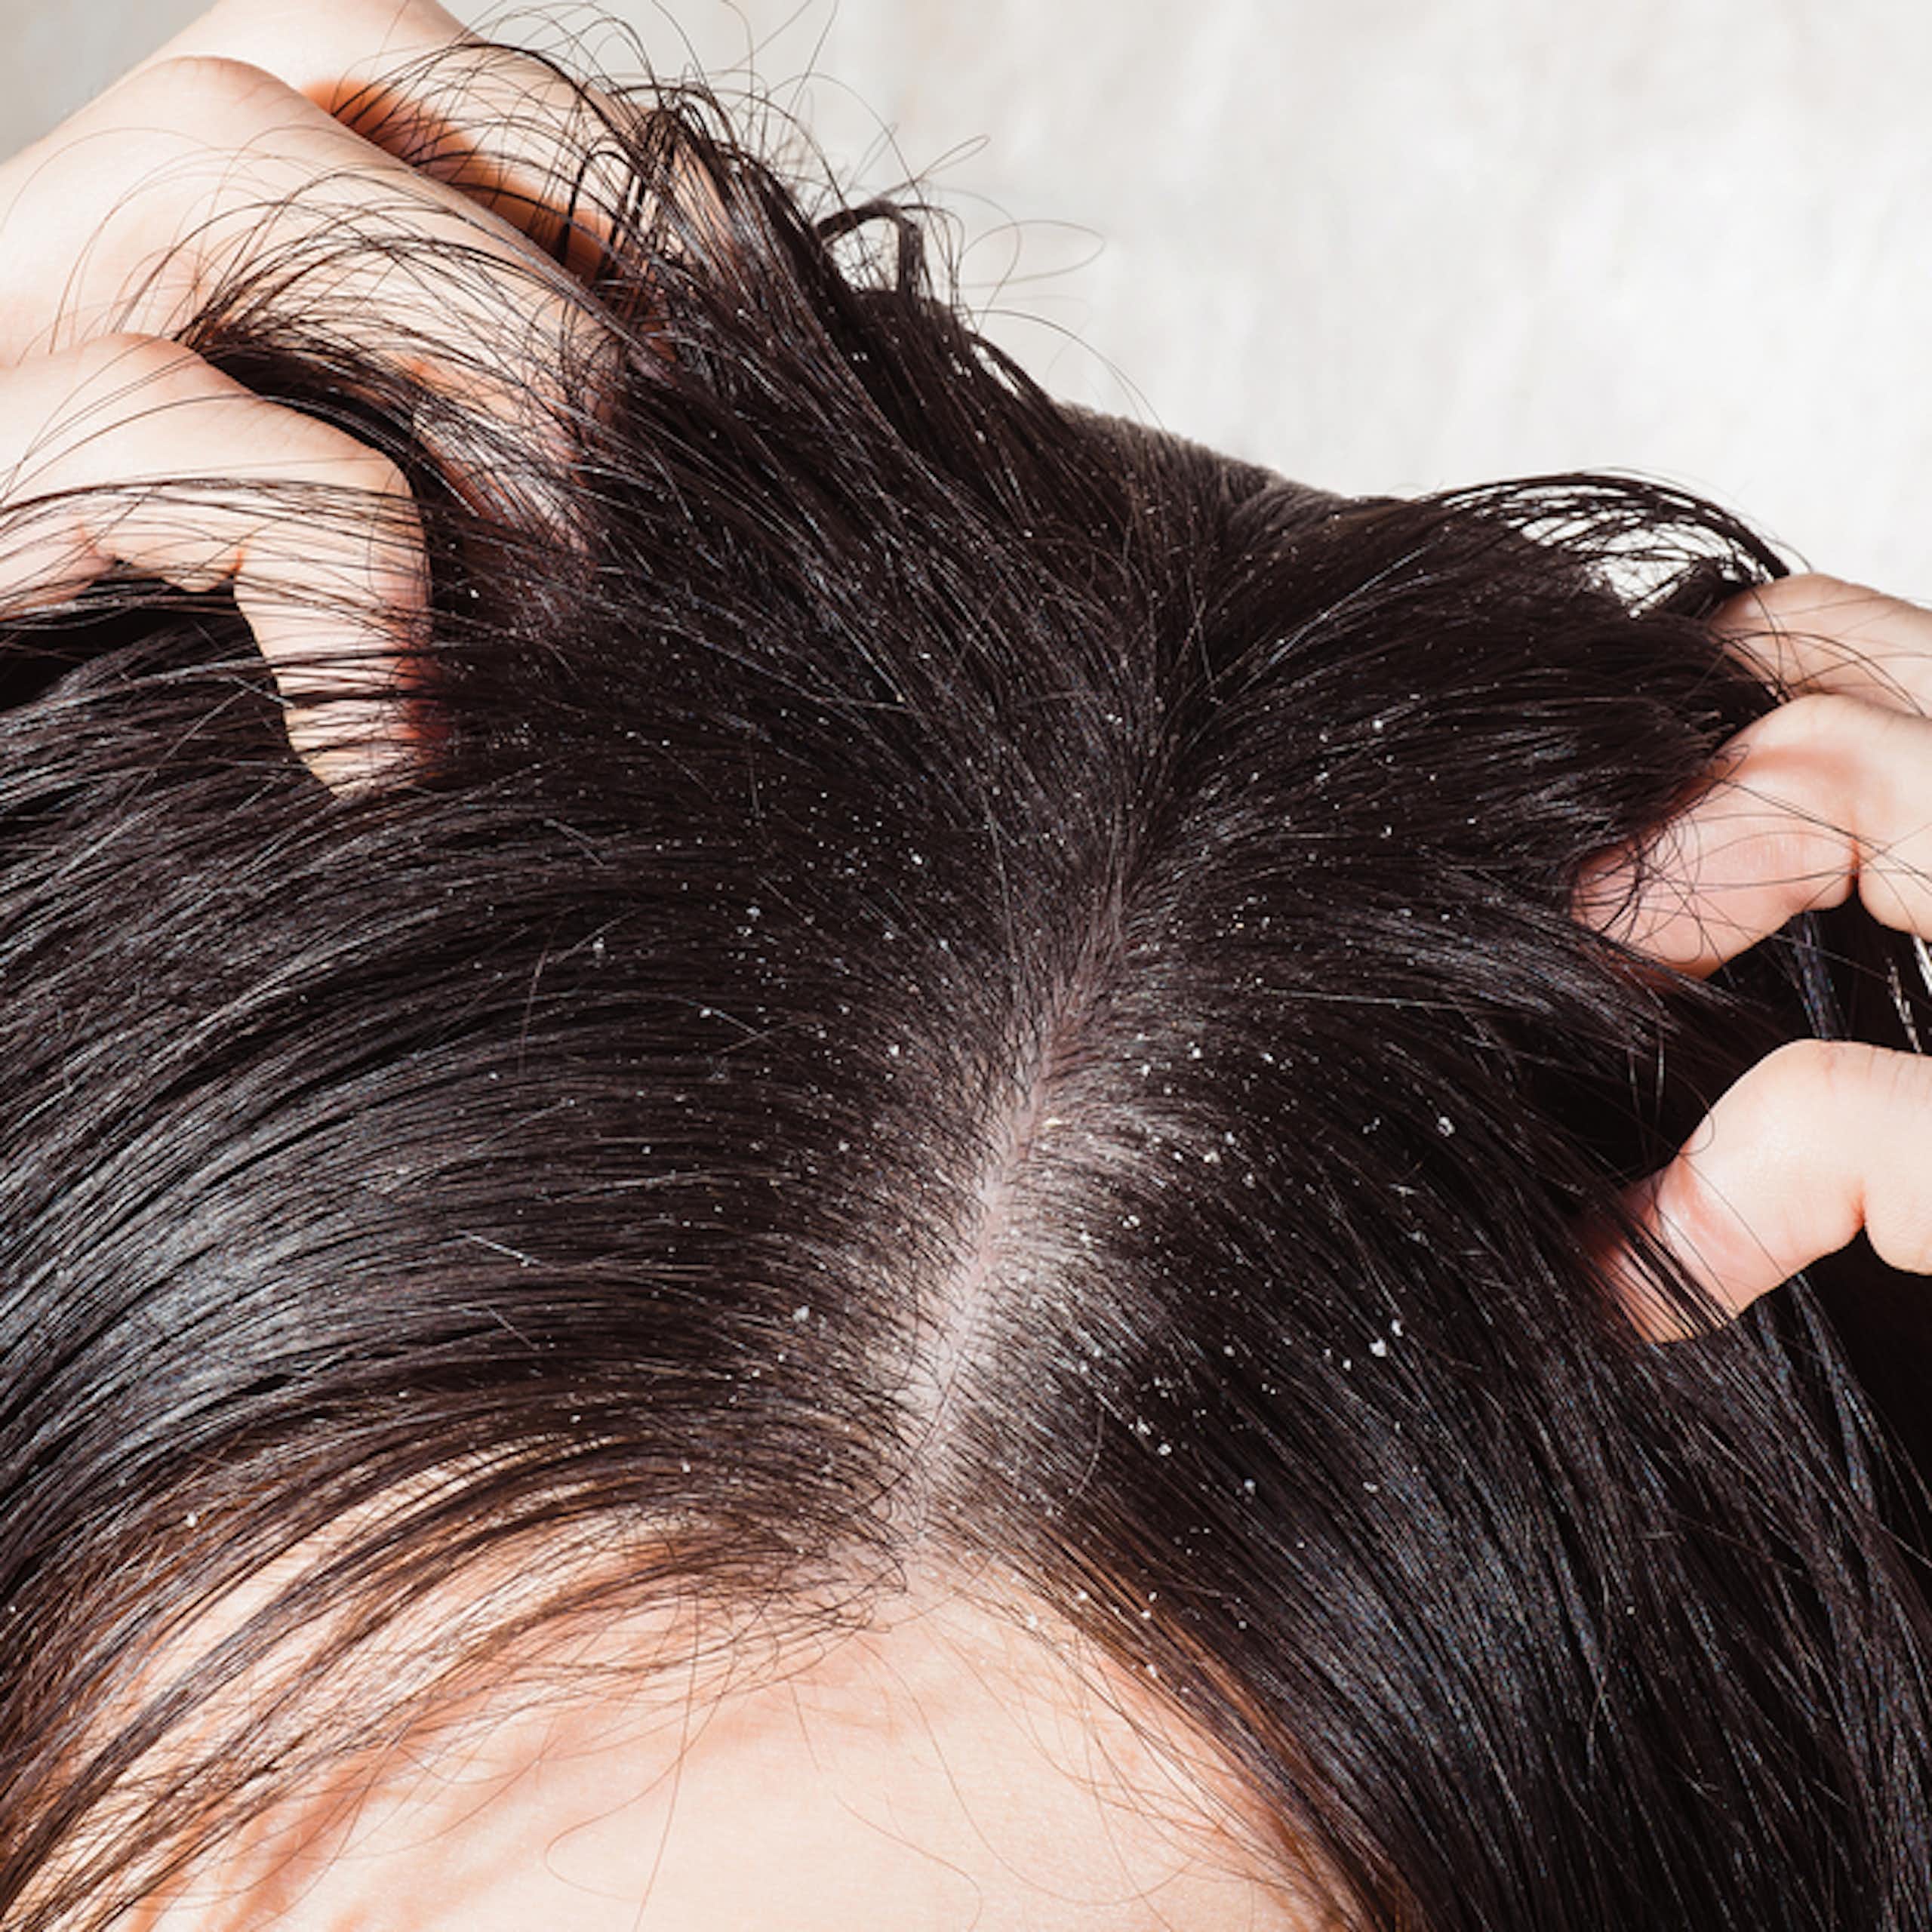 Person scratching head with dandruff visible in dark hair